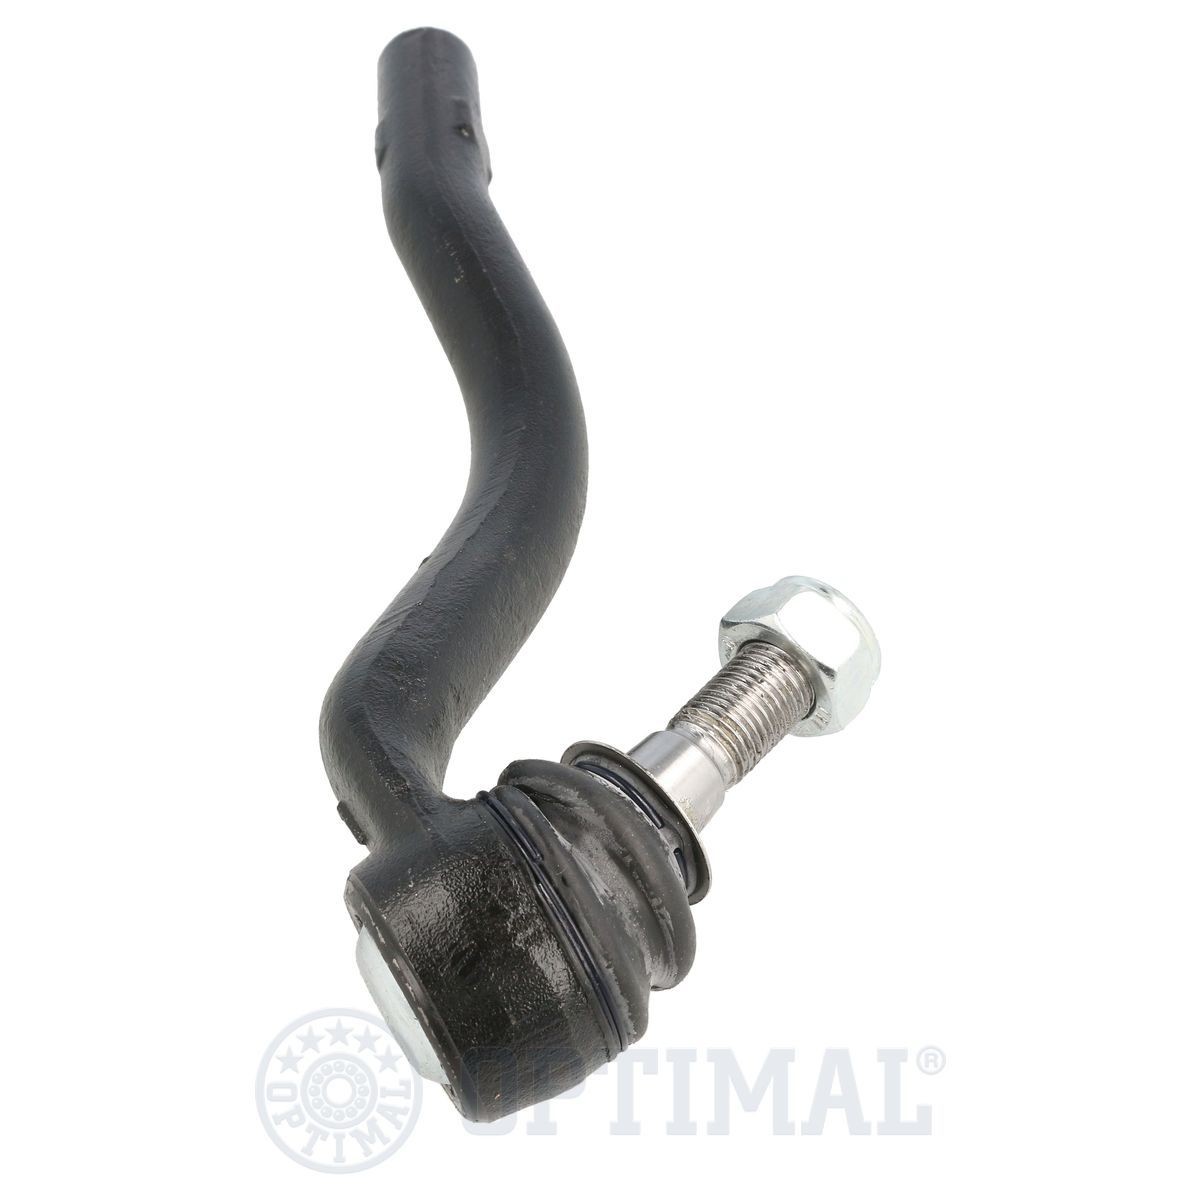 OPTIMAL G1-1547 Track rod end Cone Size 15 mm, M14 x 1,50 RHT M mm, Front Axle Left, outer, with self-locking nut